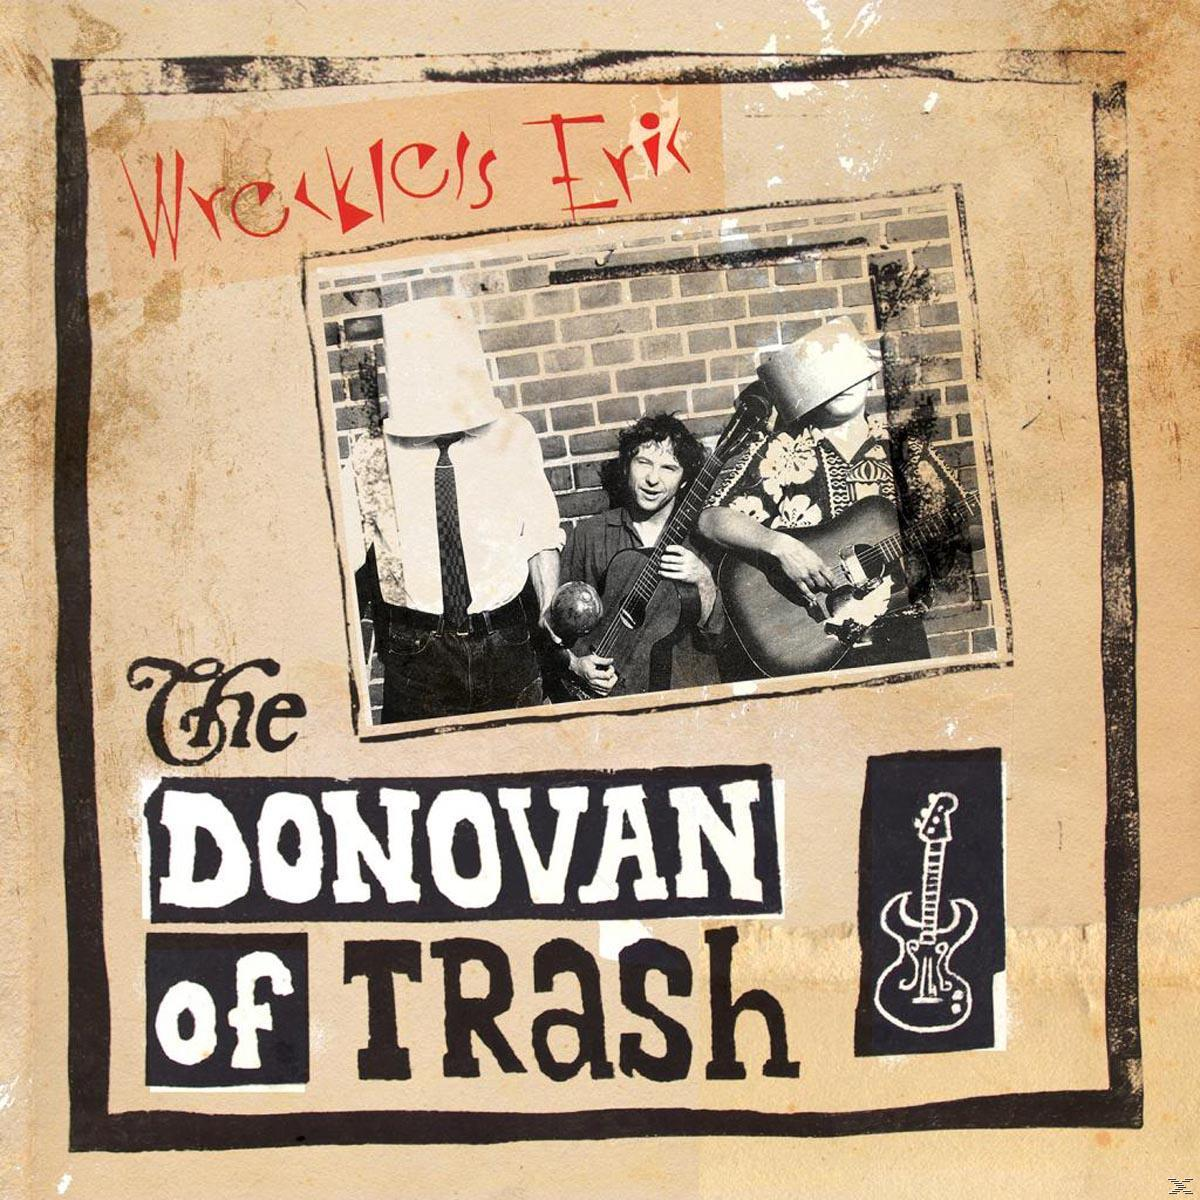 Wreckless Eric Donovan (CD) Trash The - Of 